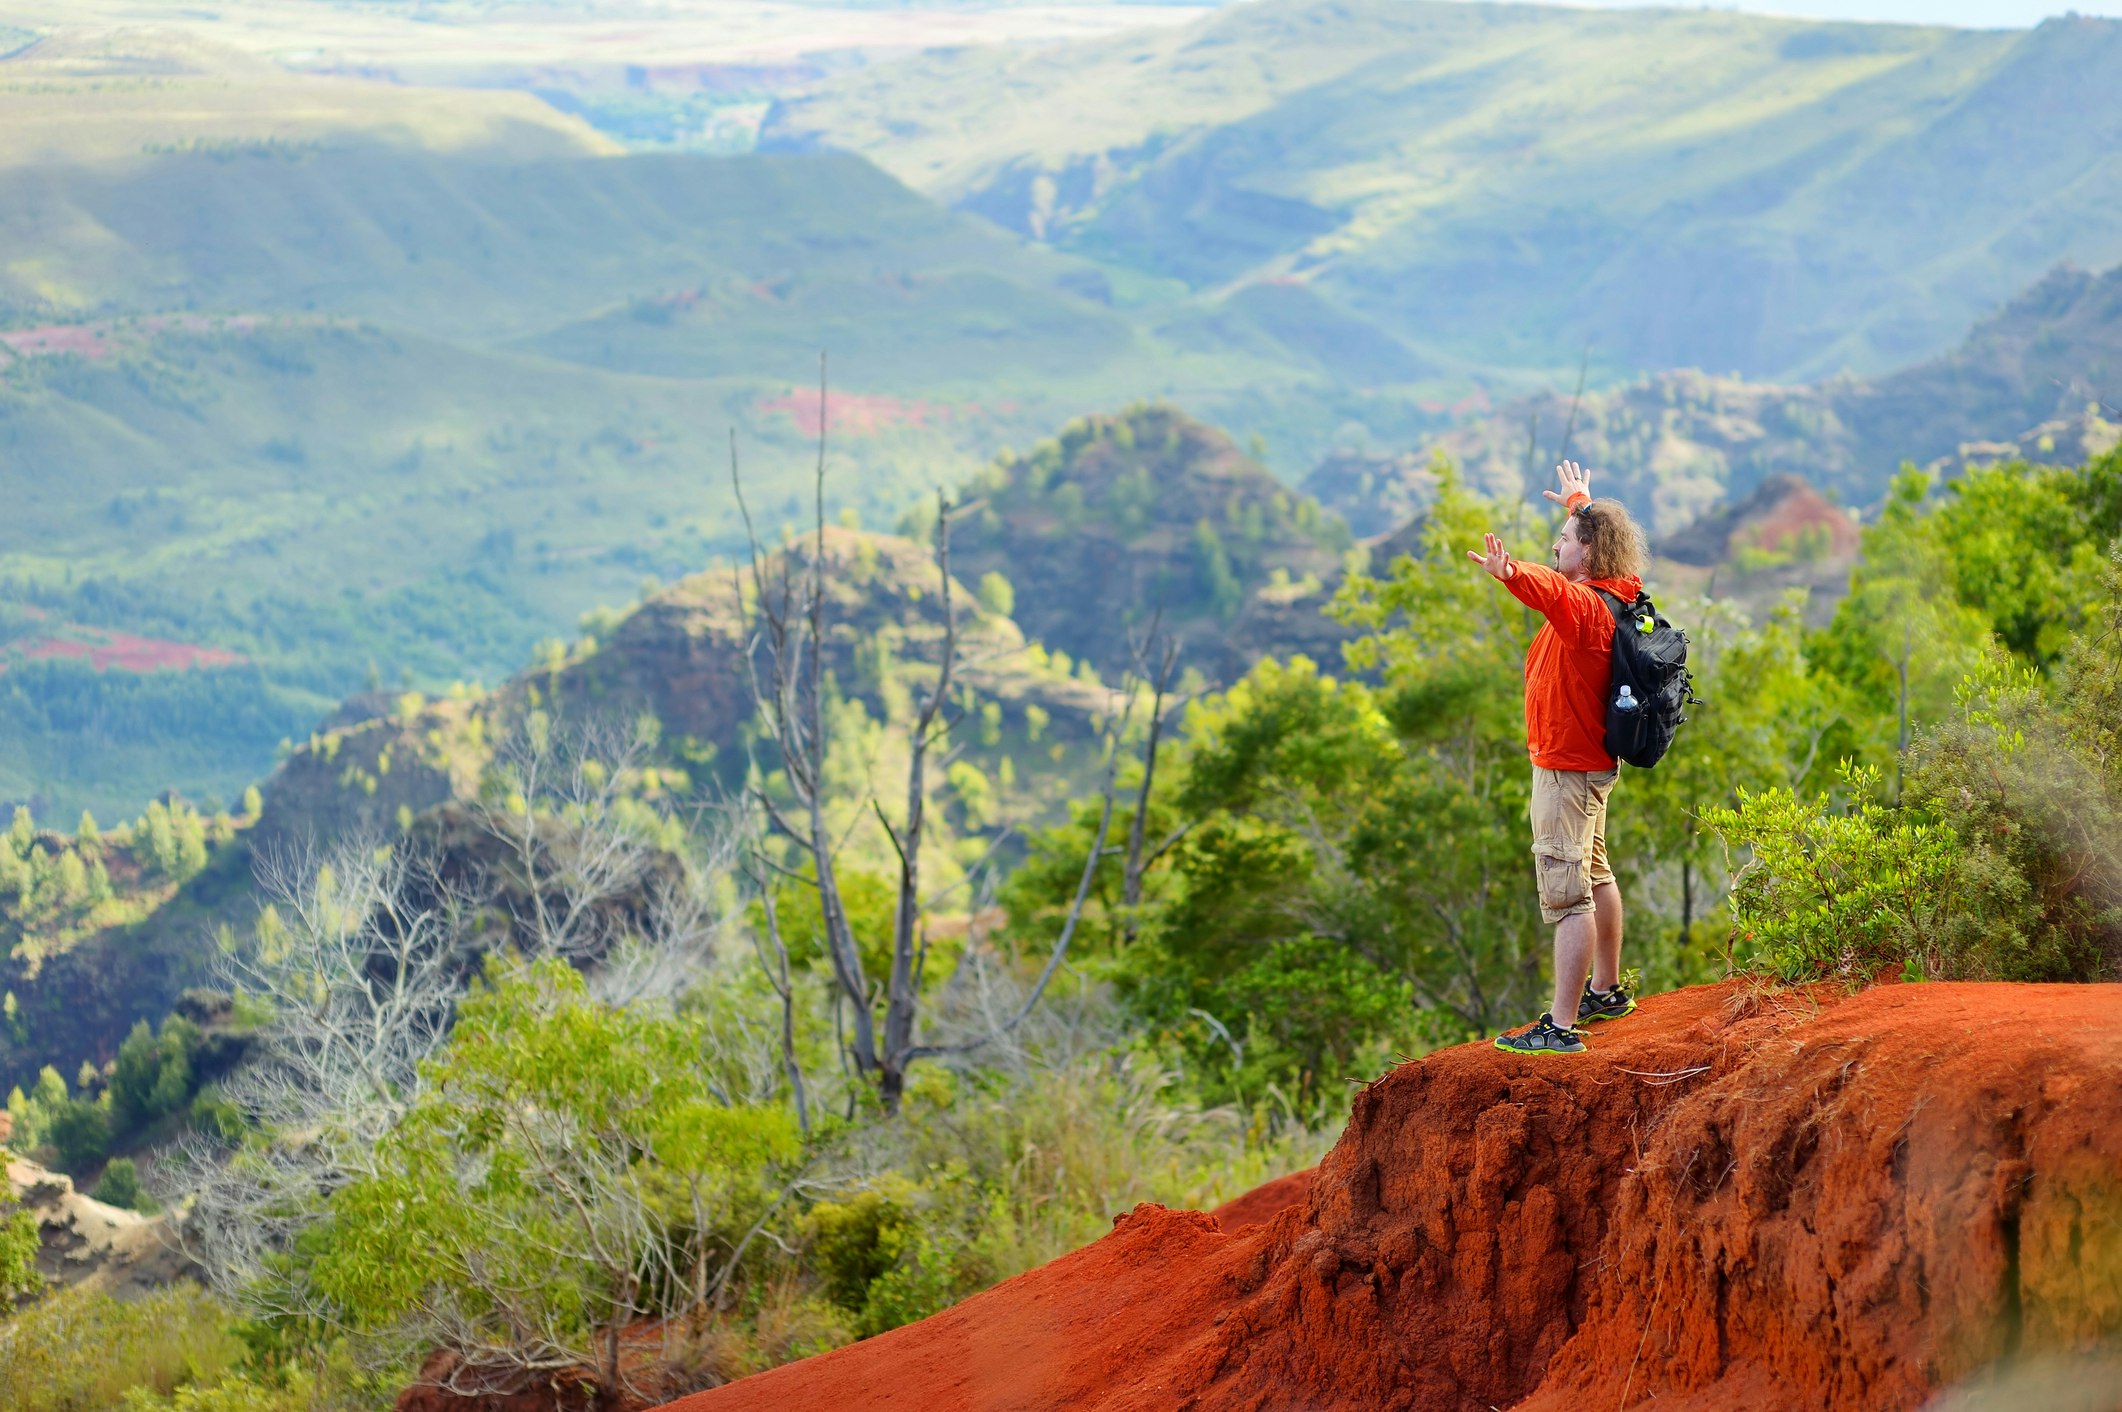 A whute young man with long hair looks out across the rust-red rocks of the Waimea Canyon in Hawaii